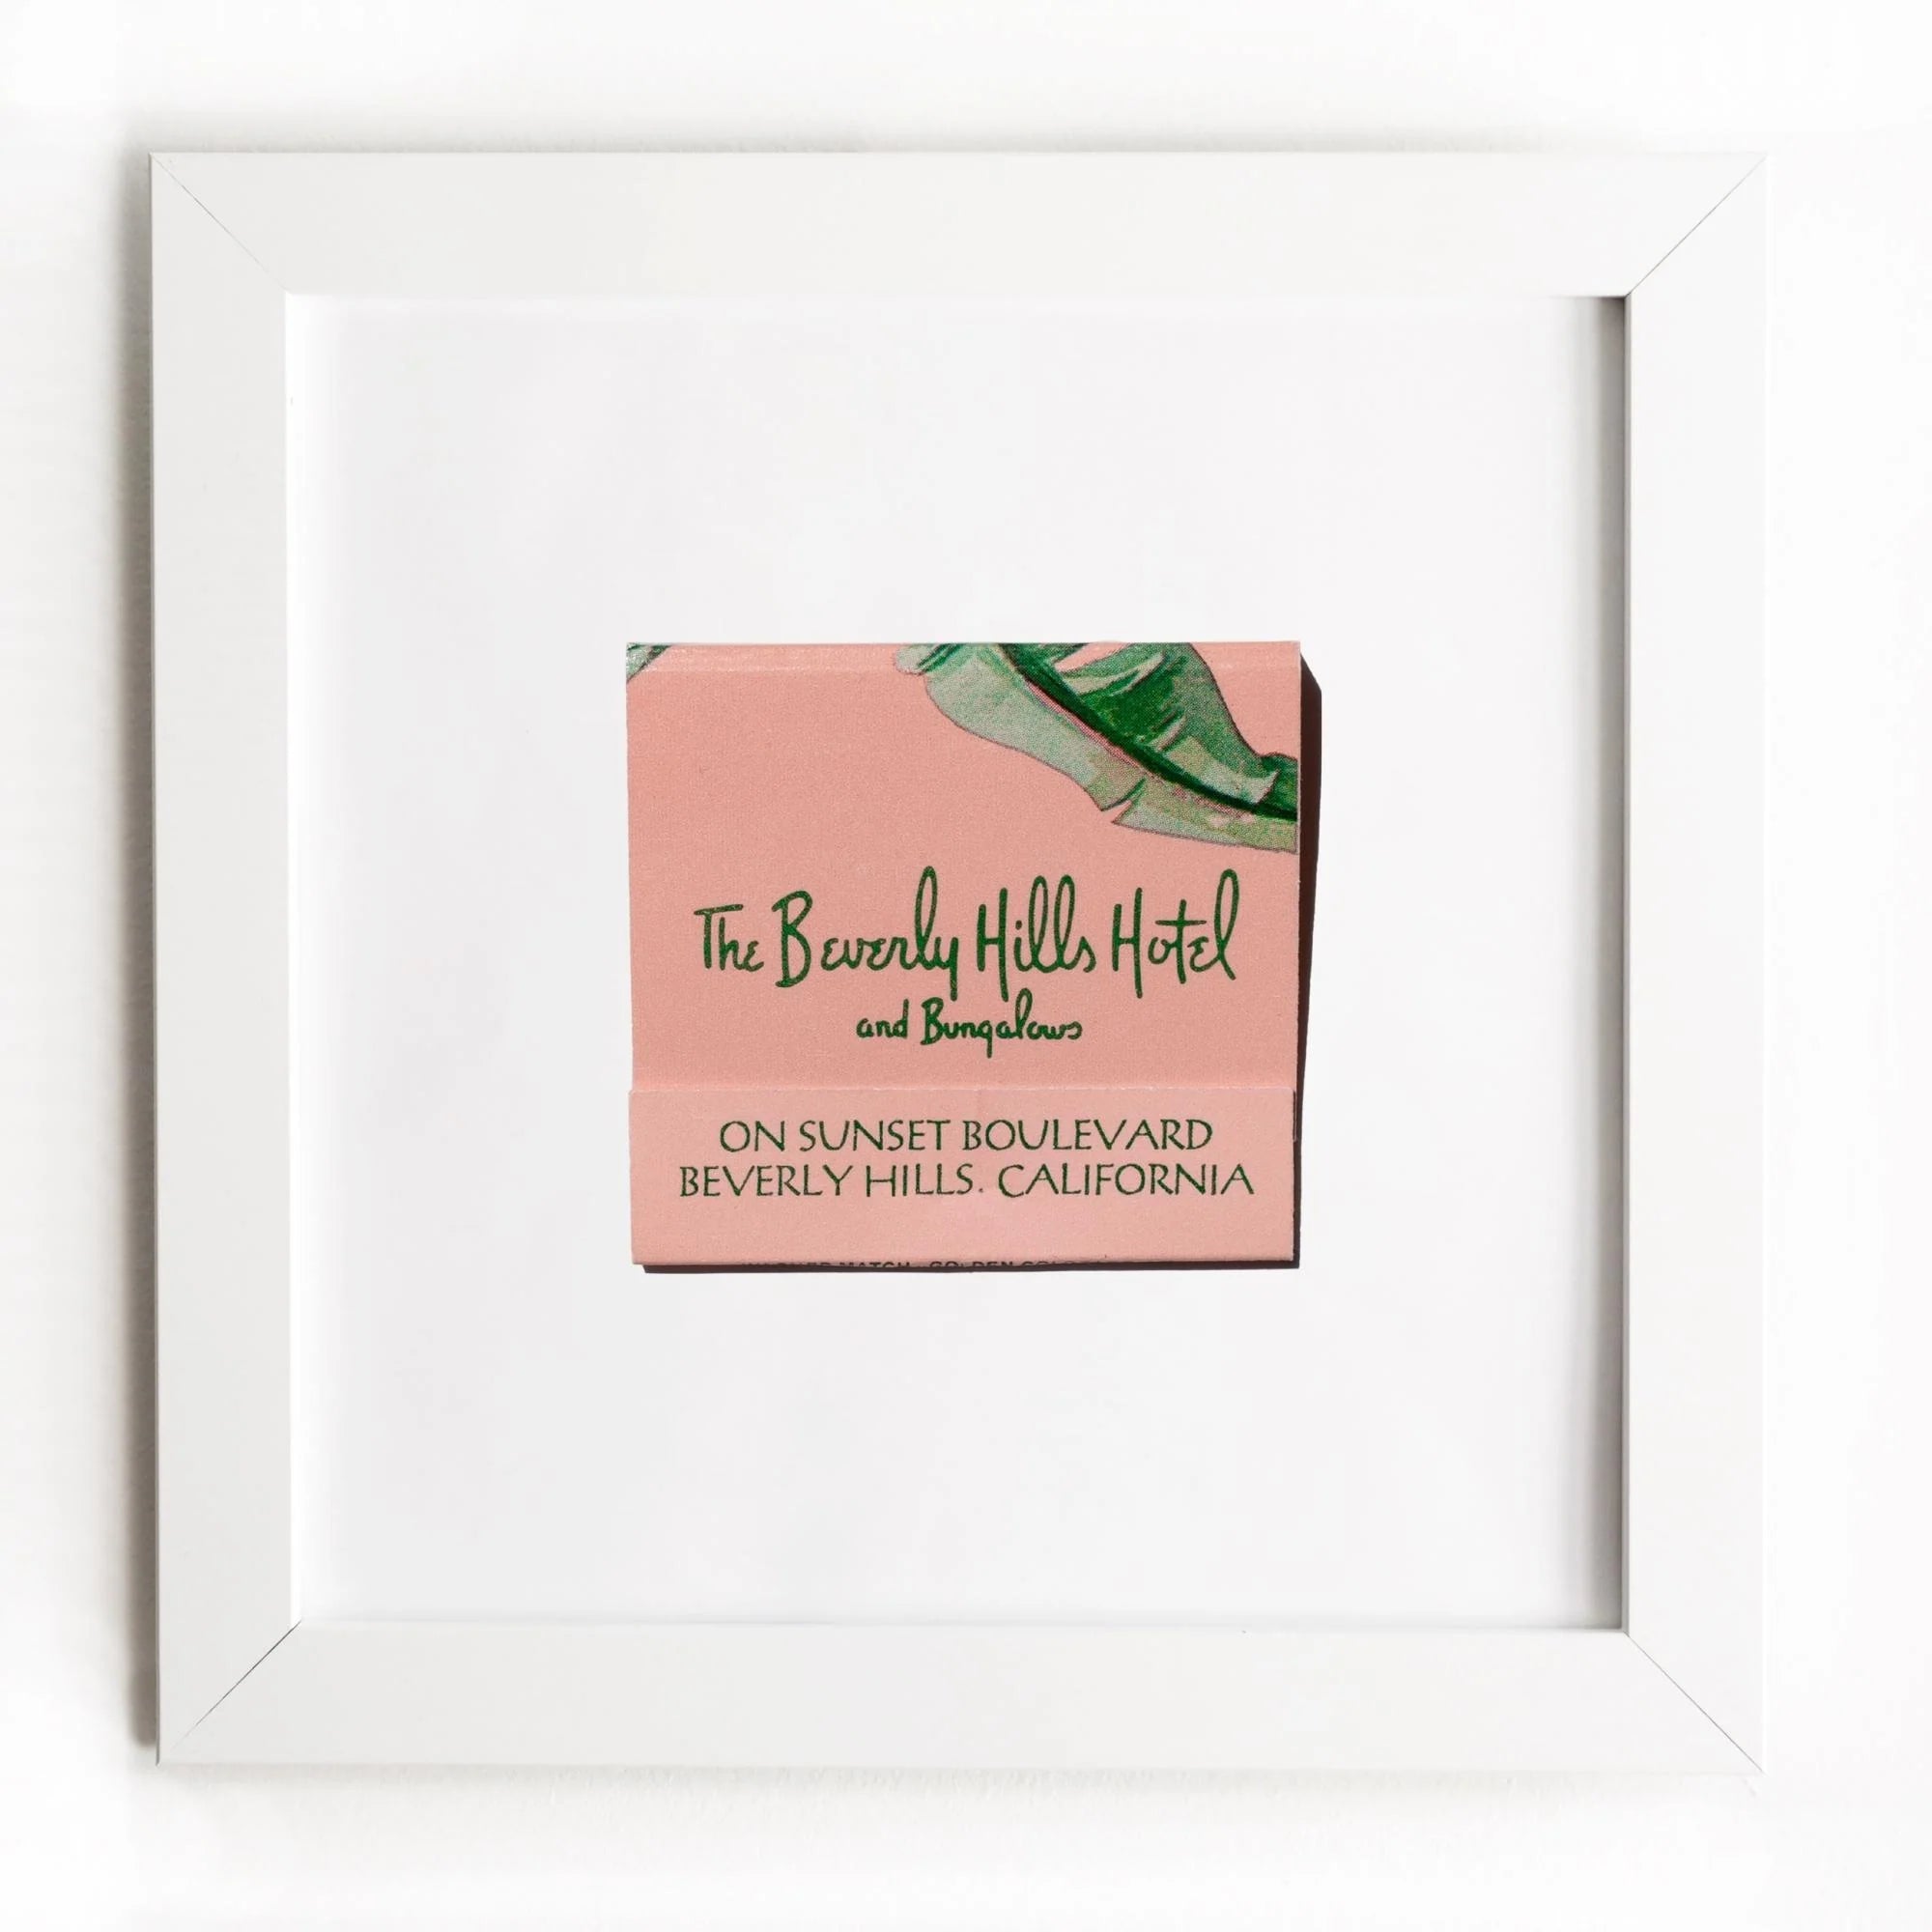 A framed artwork of a vintage hotel matchbook cover labeled "The Beverly Hills Hotel and Bungalows" in a Match South Art Square White Frame, featuring a pink background and green palm leaf design.